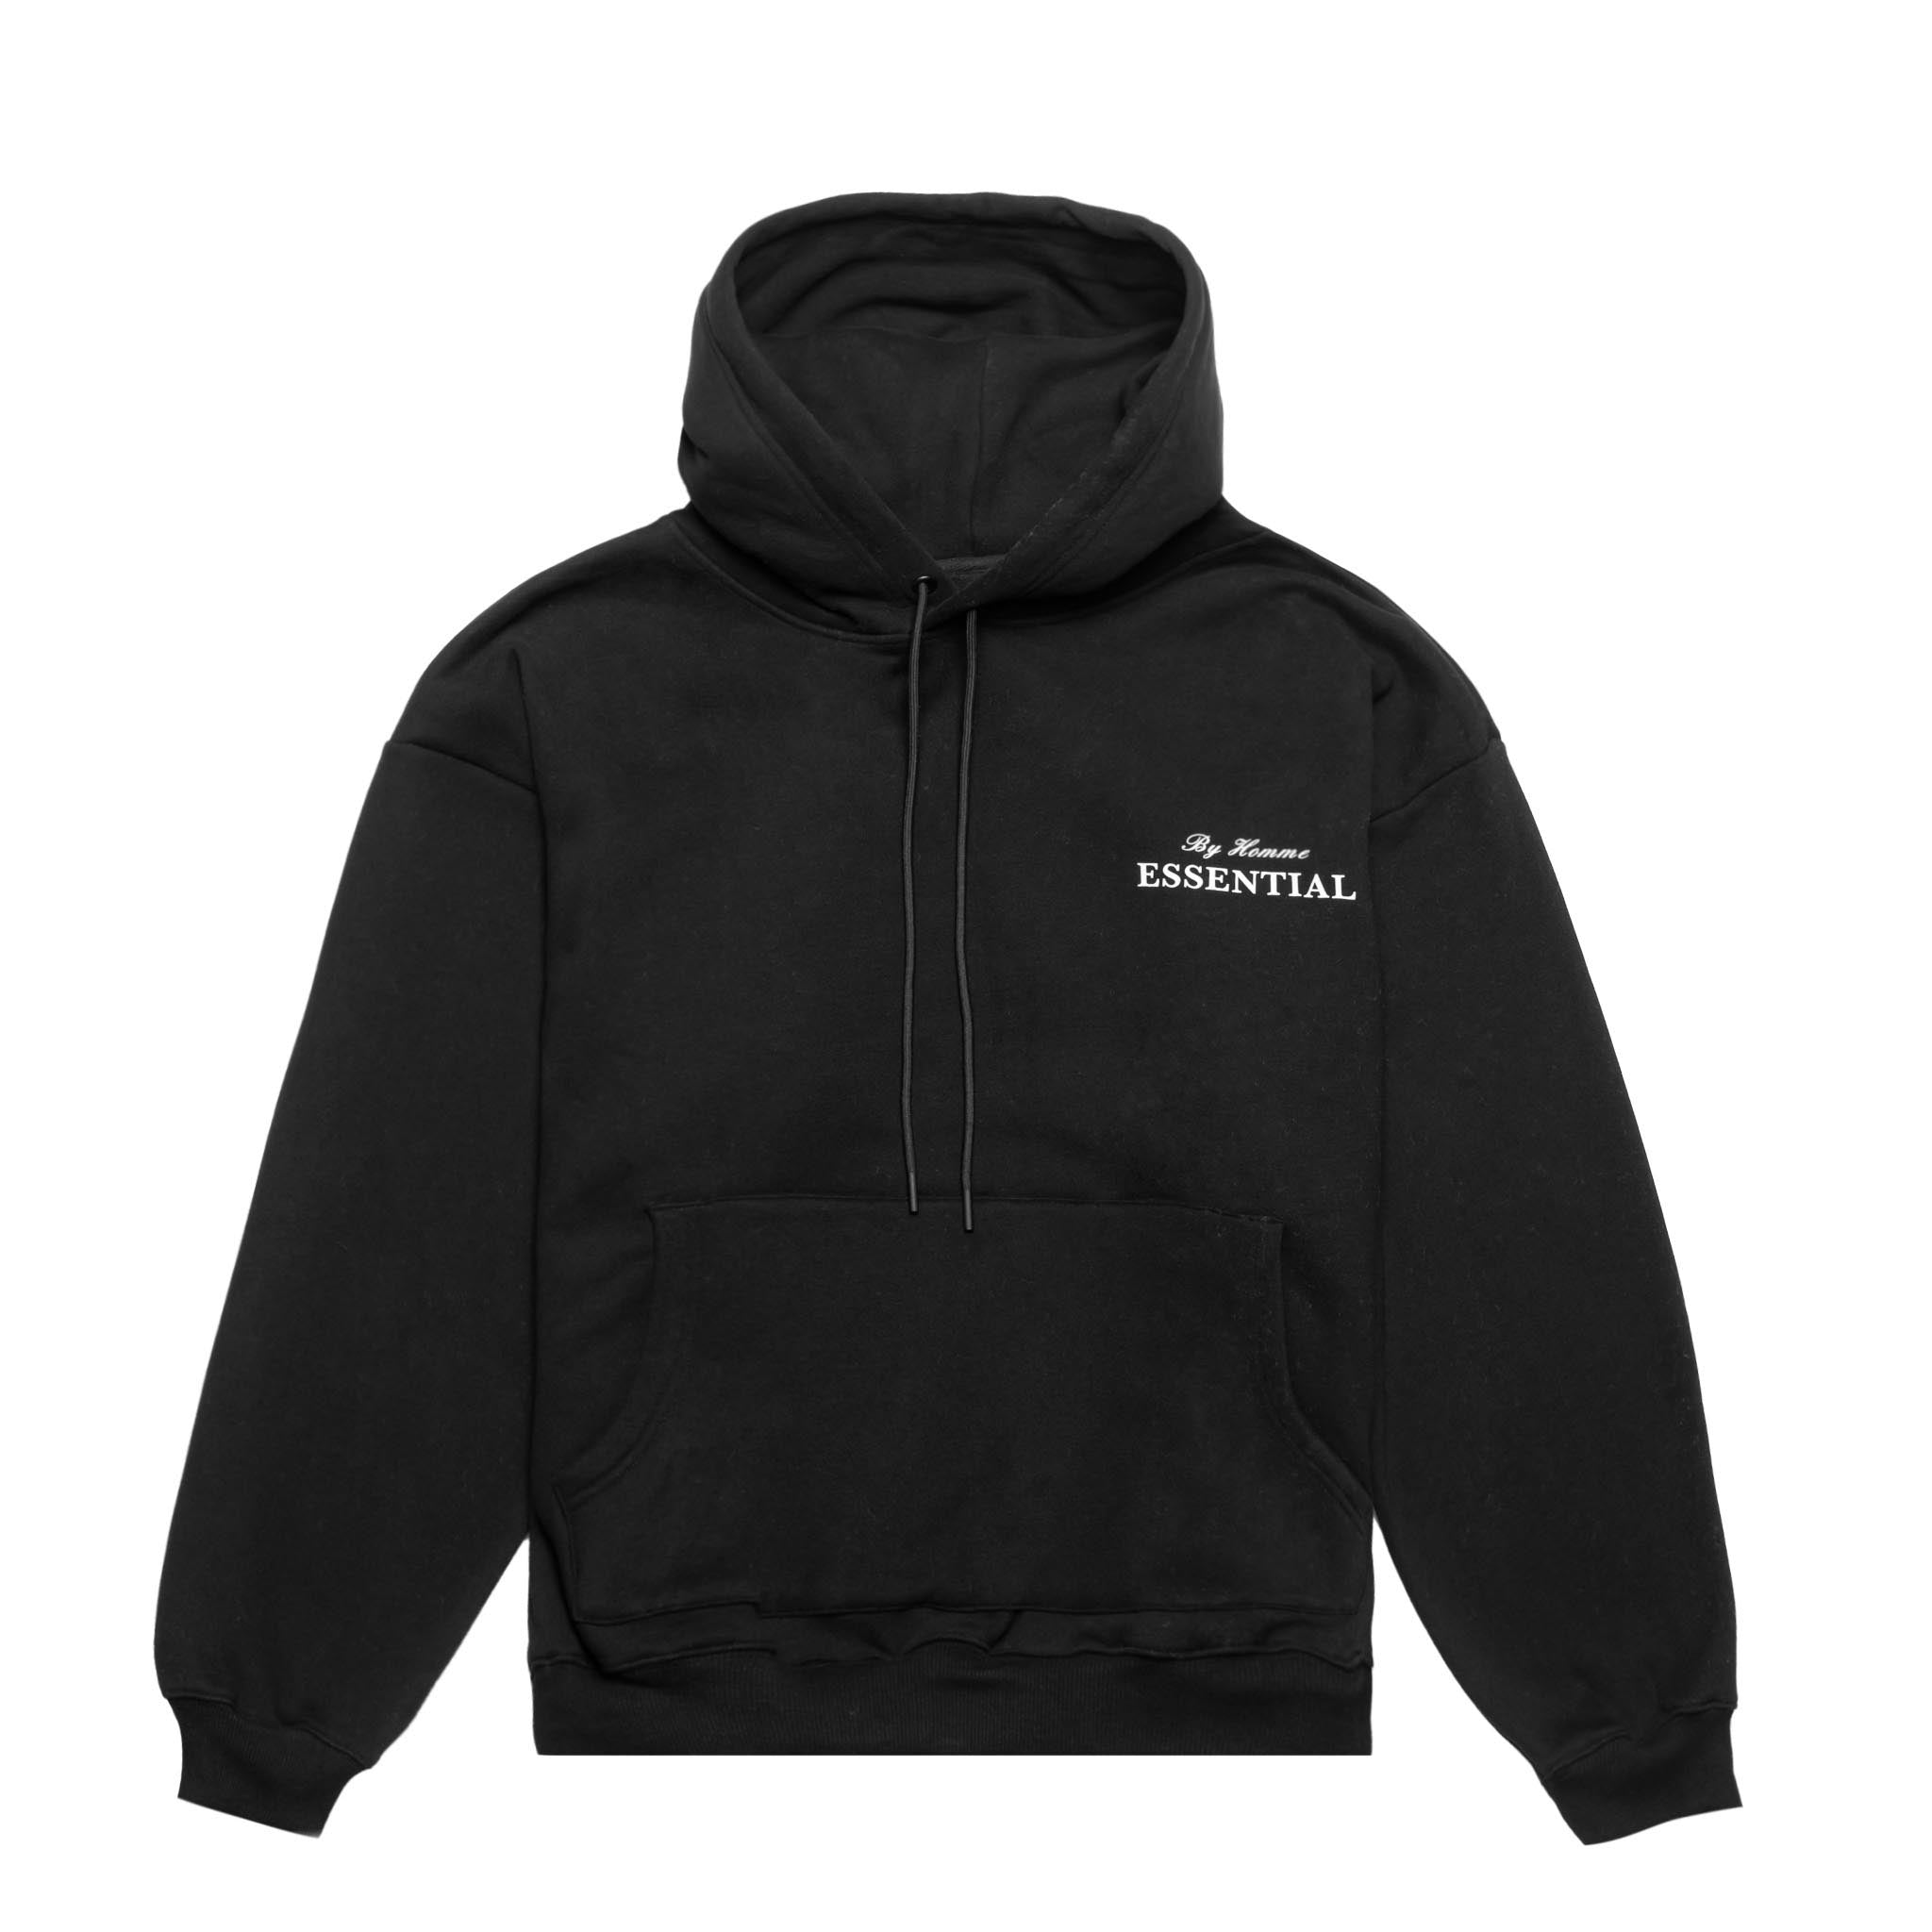 Express, Silky Banded Waist Hooded Sweatshirt in Pitch Black